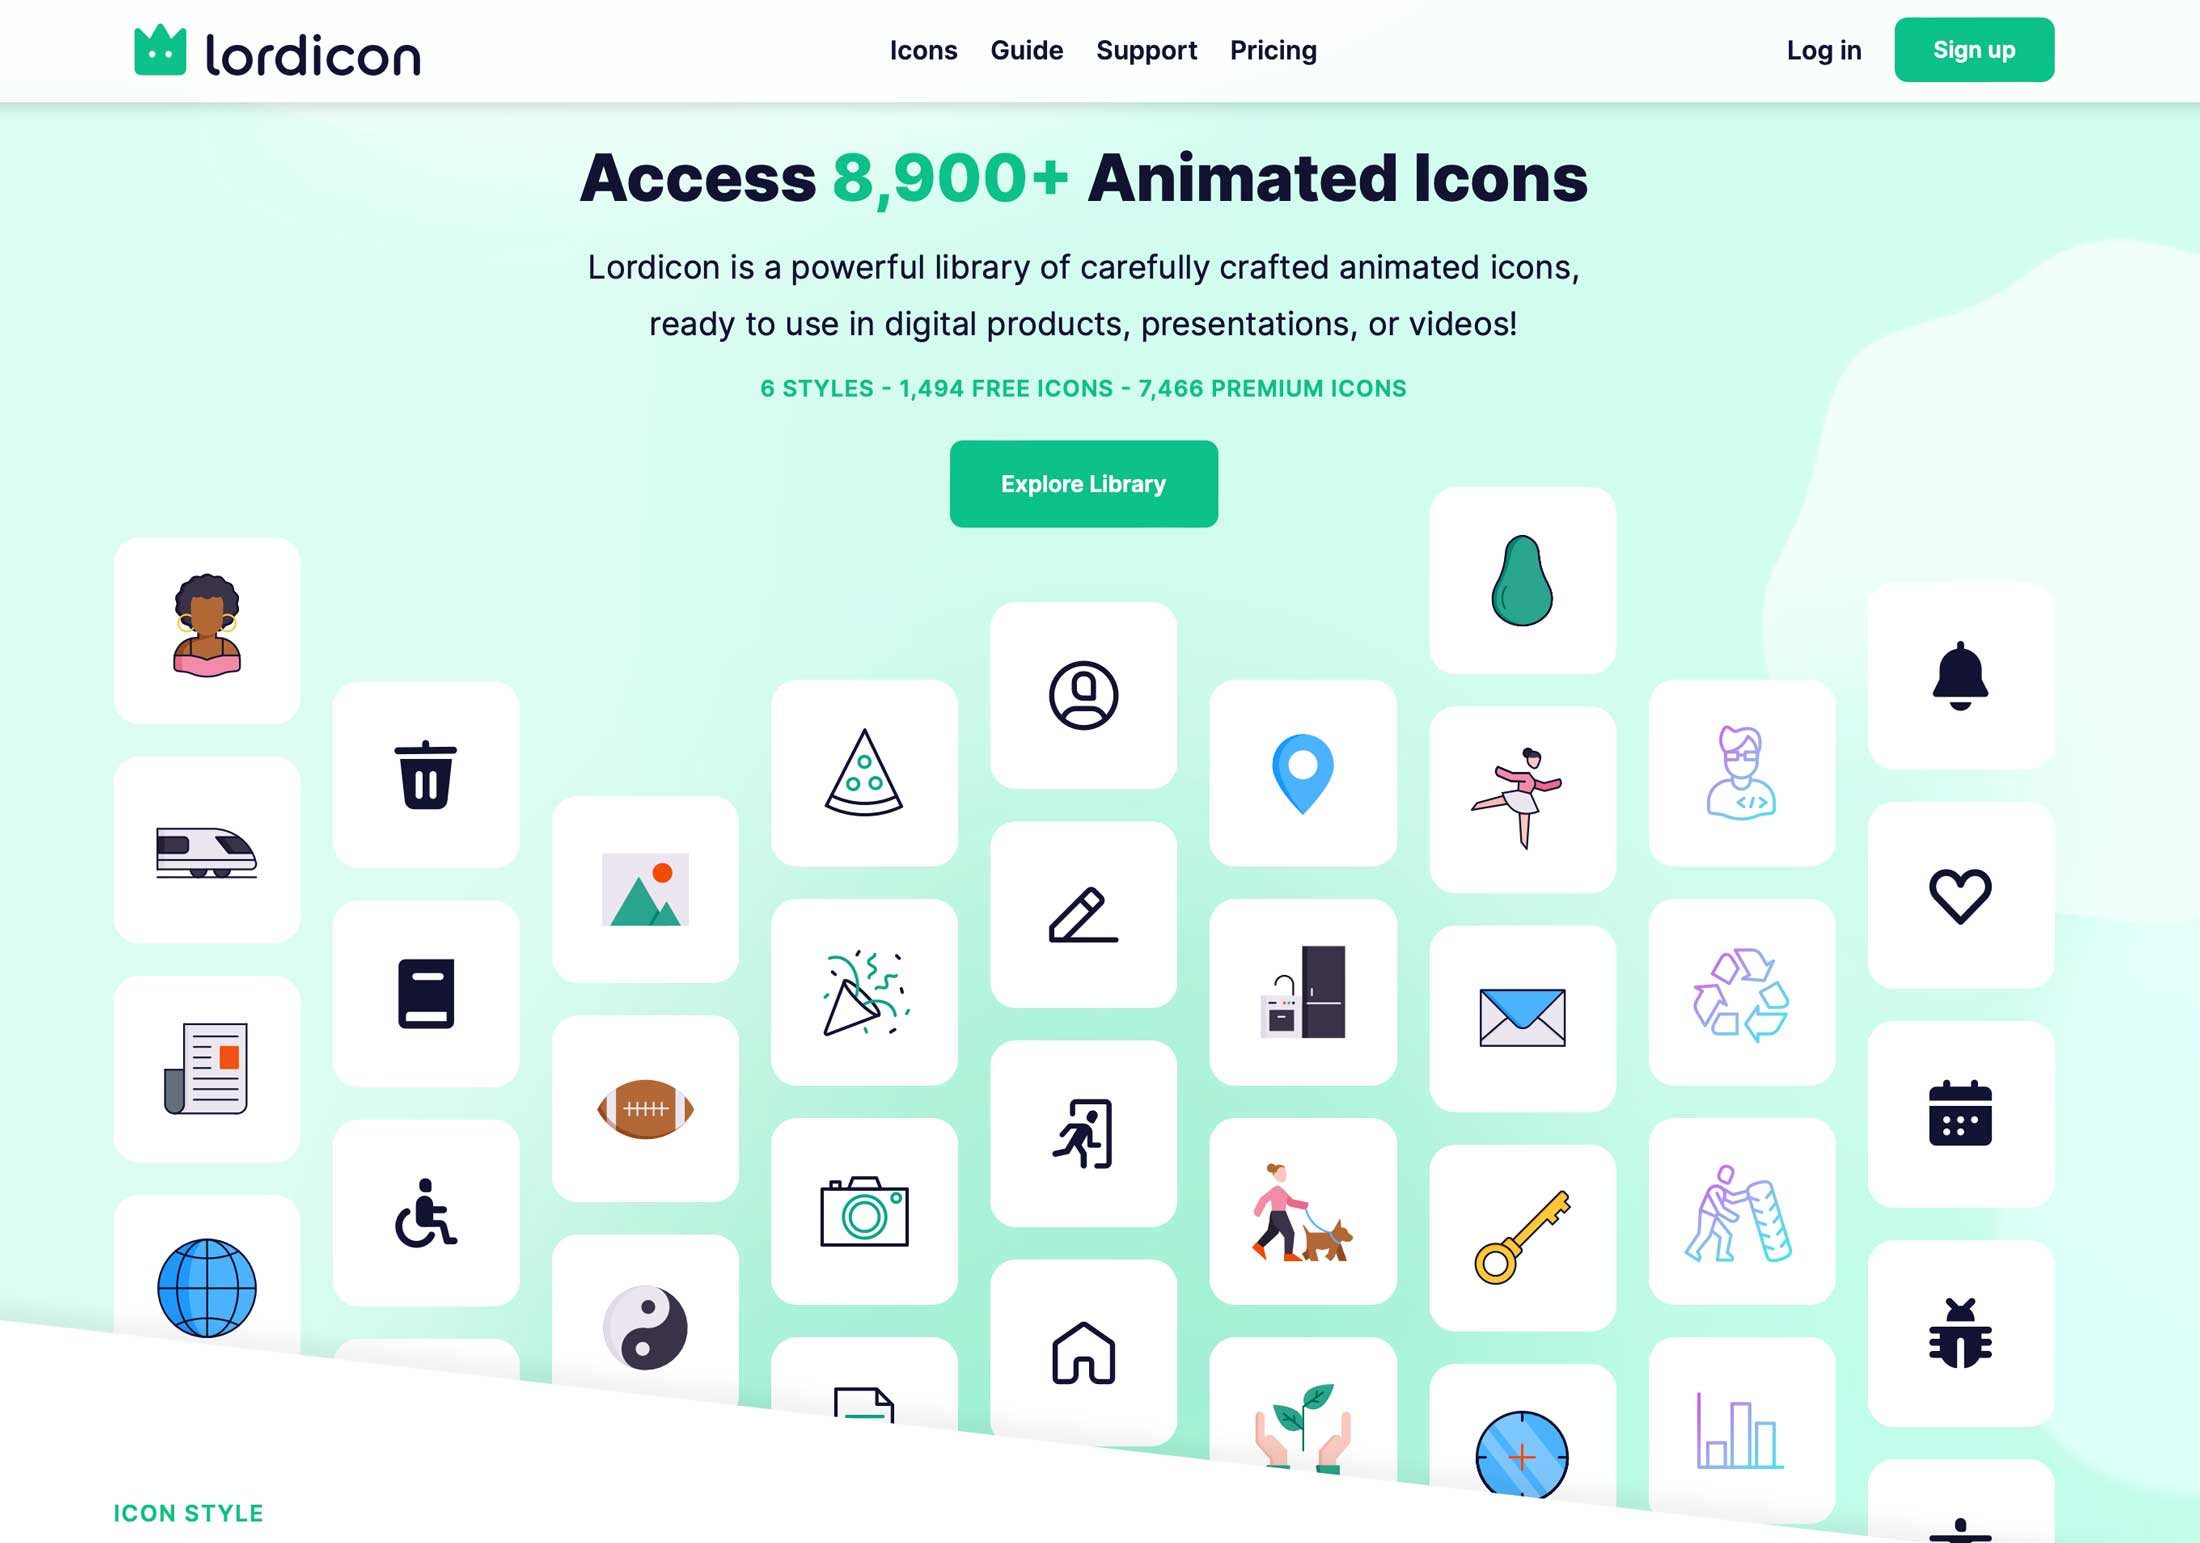 Lordicon icons with divi drag and drop file upload